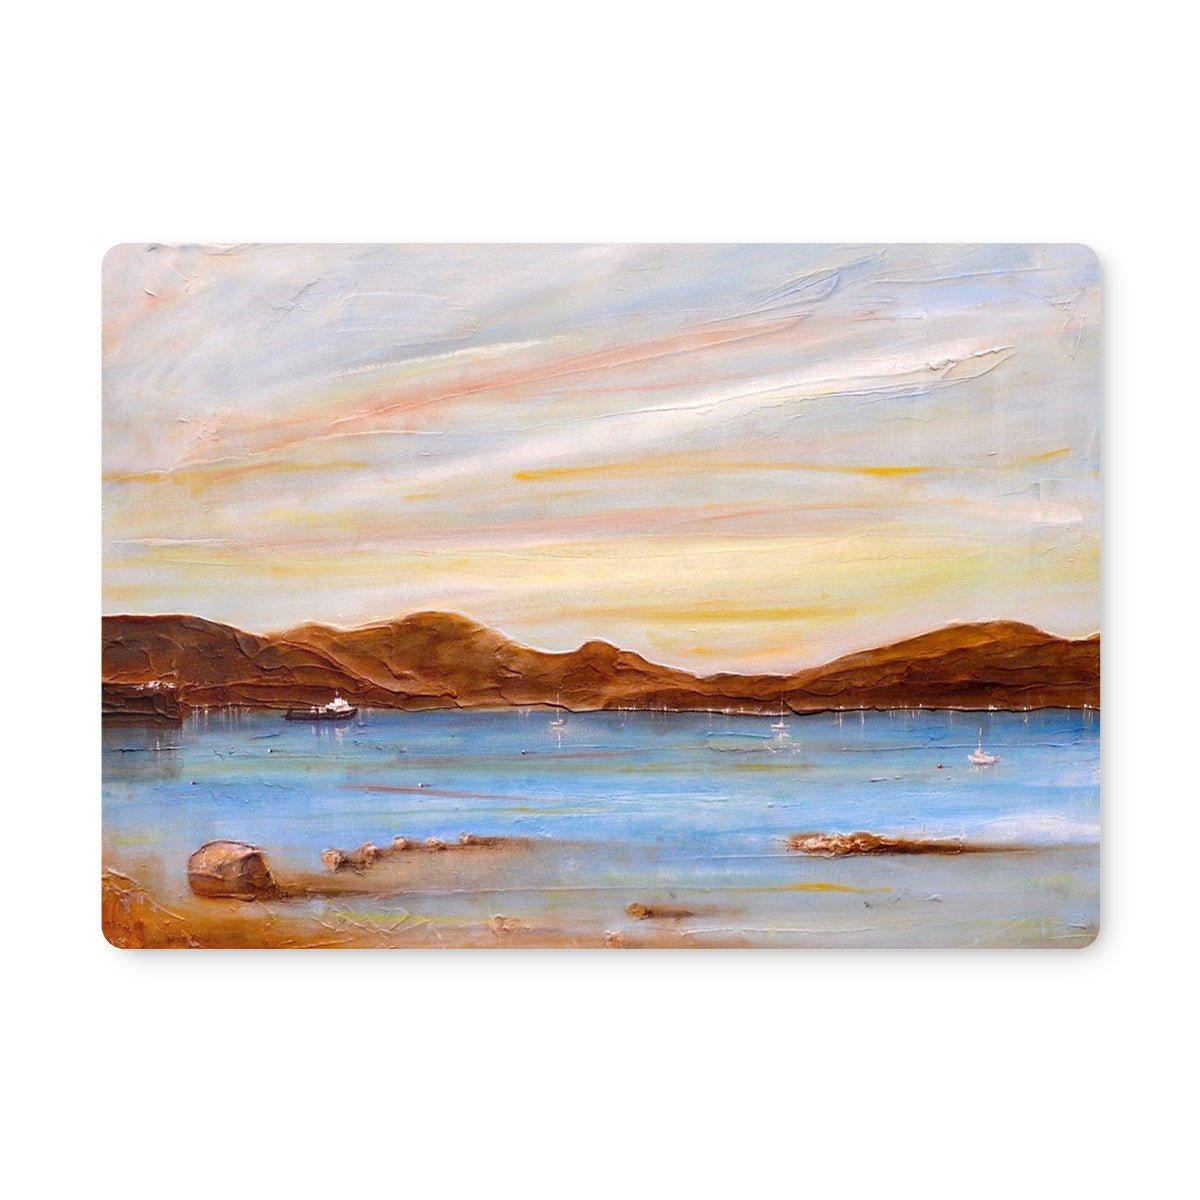 The Last Ferry To Dunoon Art Gifts Placemat-Placemats-River Clyde Art Gallery-6 Placemats-Paintings, Prints, Homeware, Art Gifts From Scotland By Scottish Artist Kevin Hunter